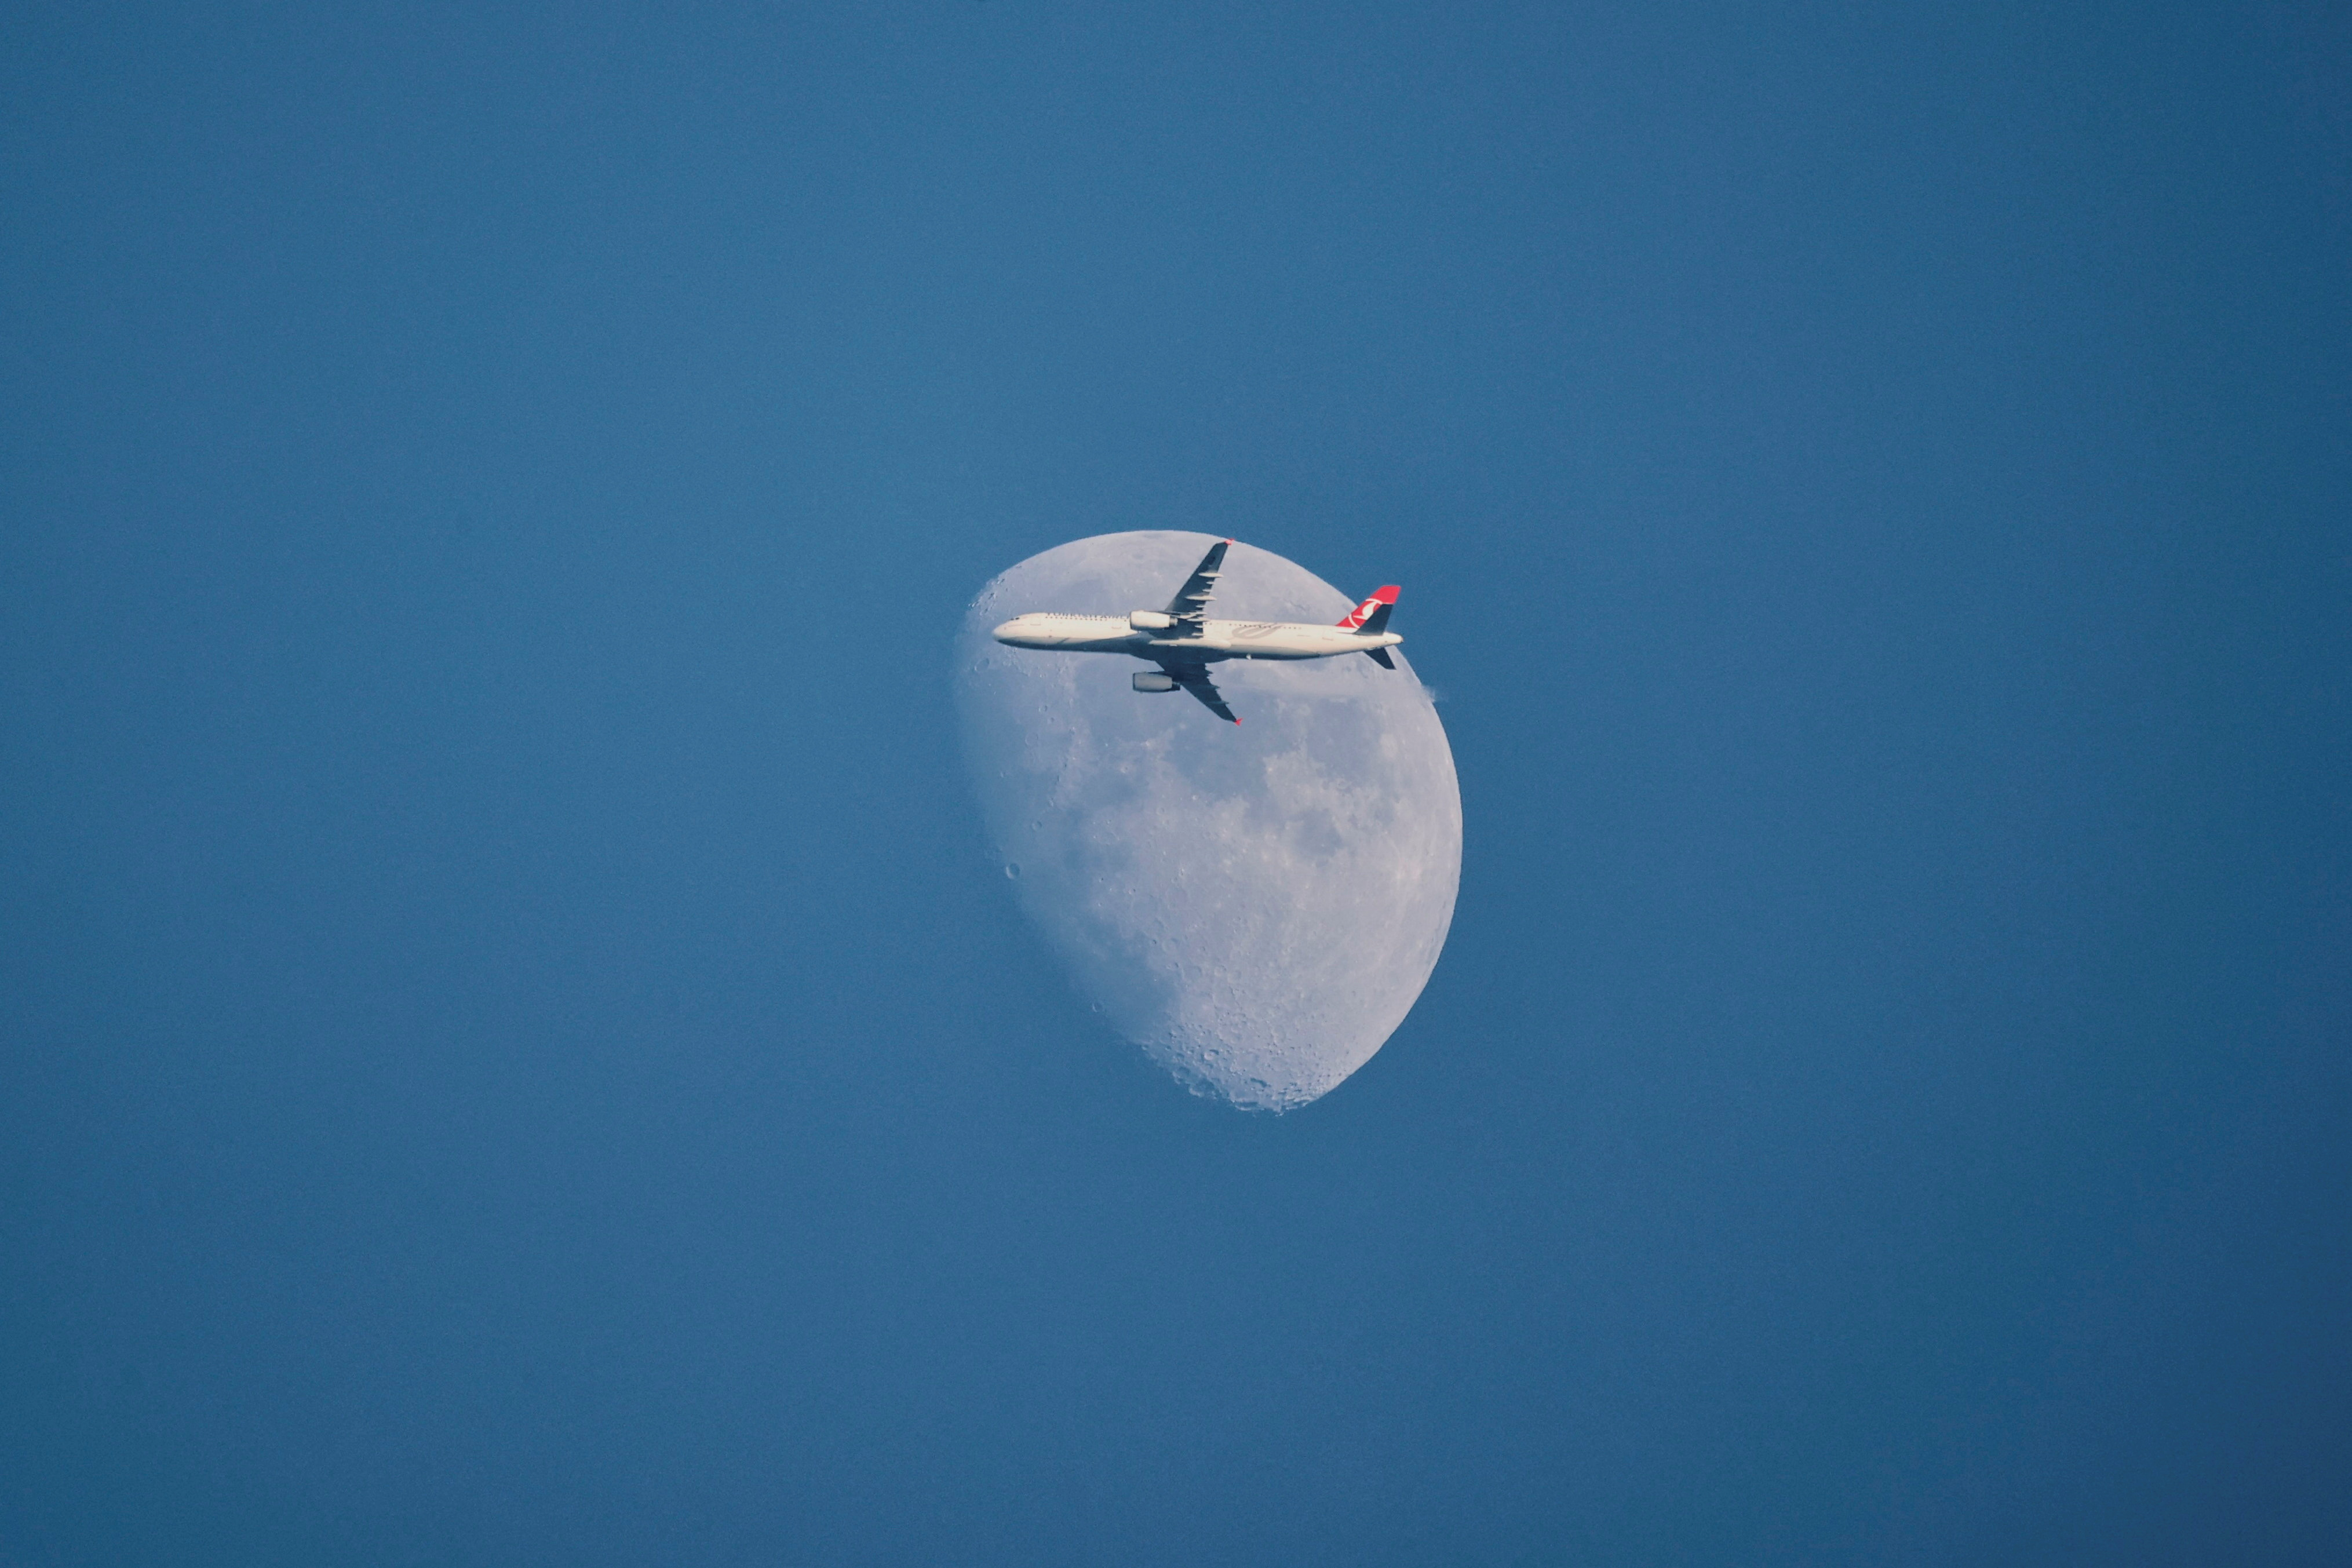 A Turkish Airlines Airbus A321-231 aircraft flies past the moon as it descends for Istanbul Airport